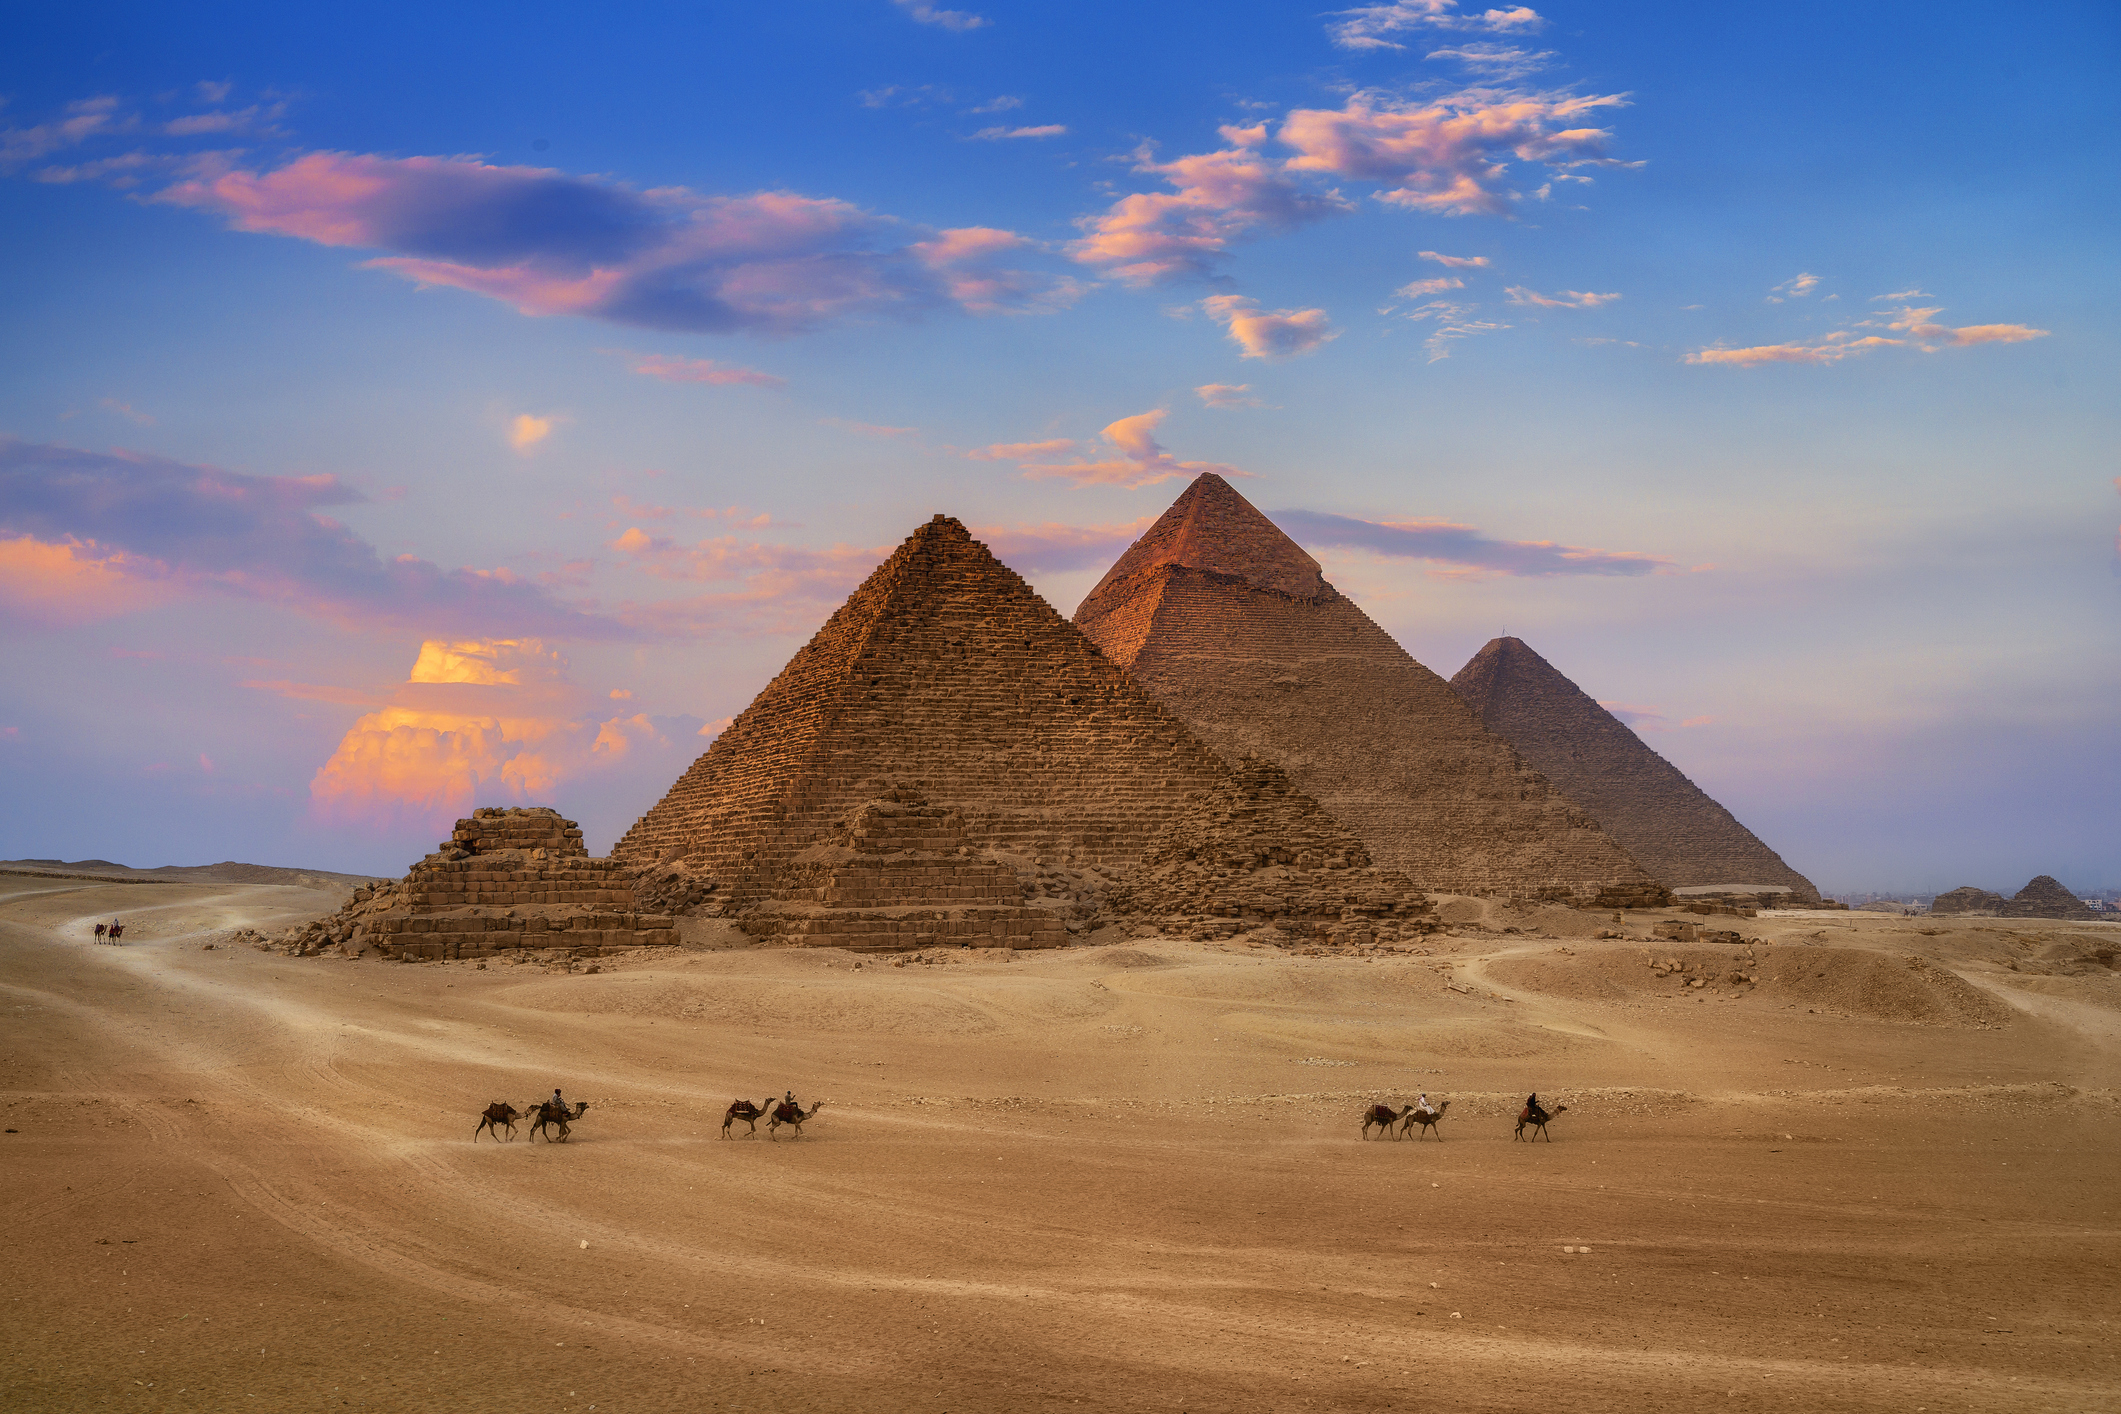 Three pyramids in Egypt with people on camels in the foreground